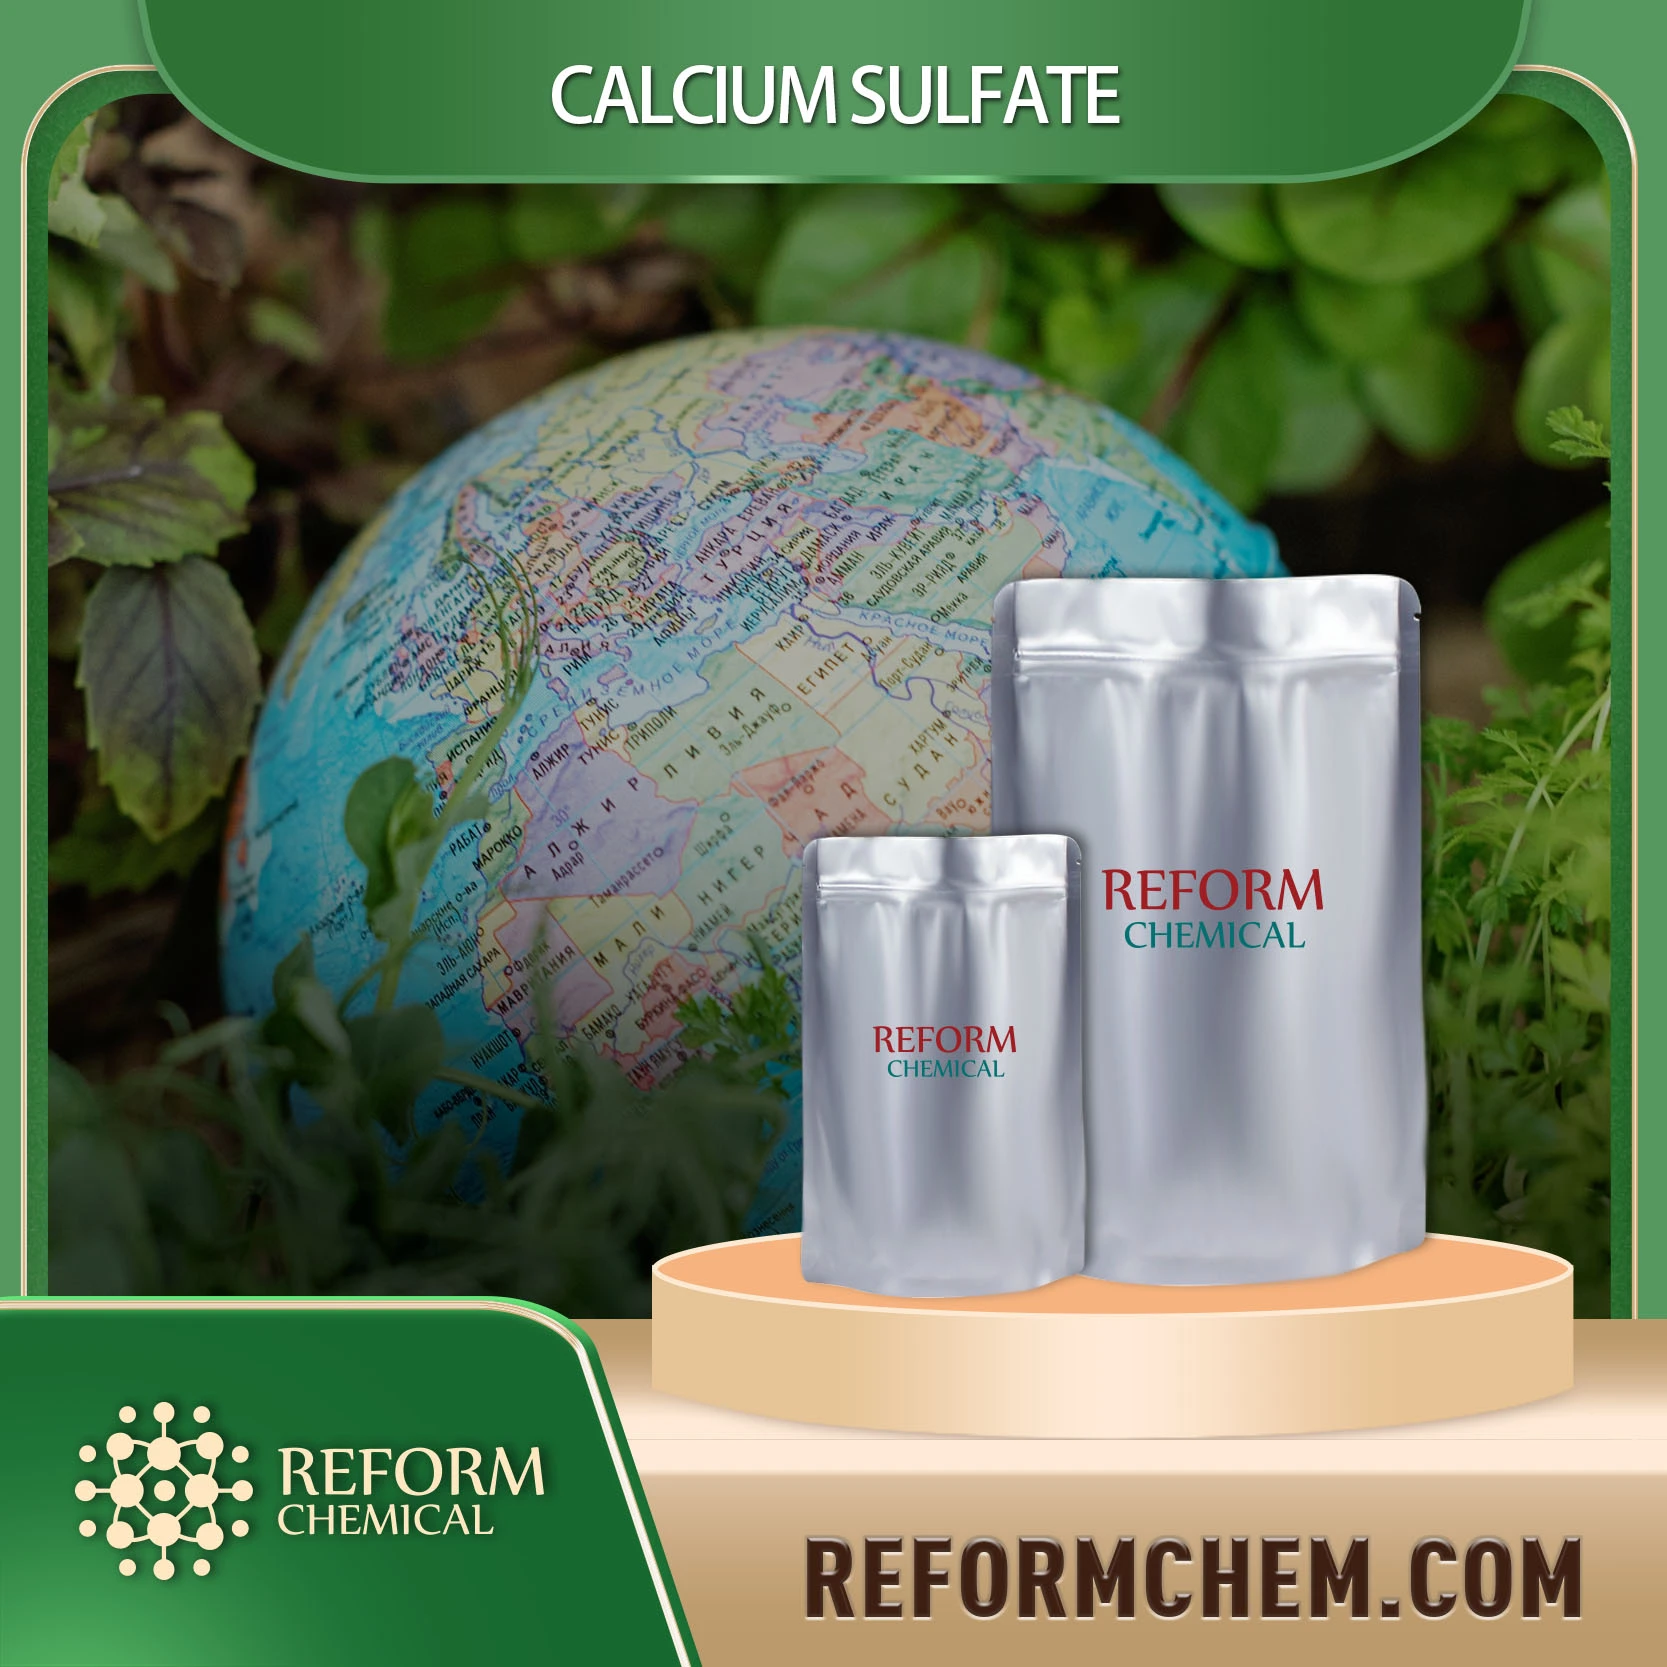 Anhydrous calcium sulfate